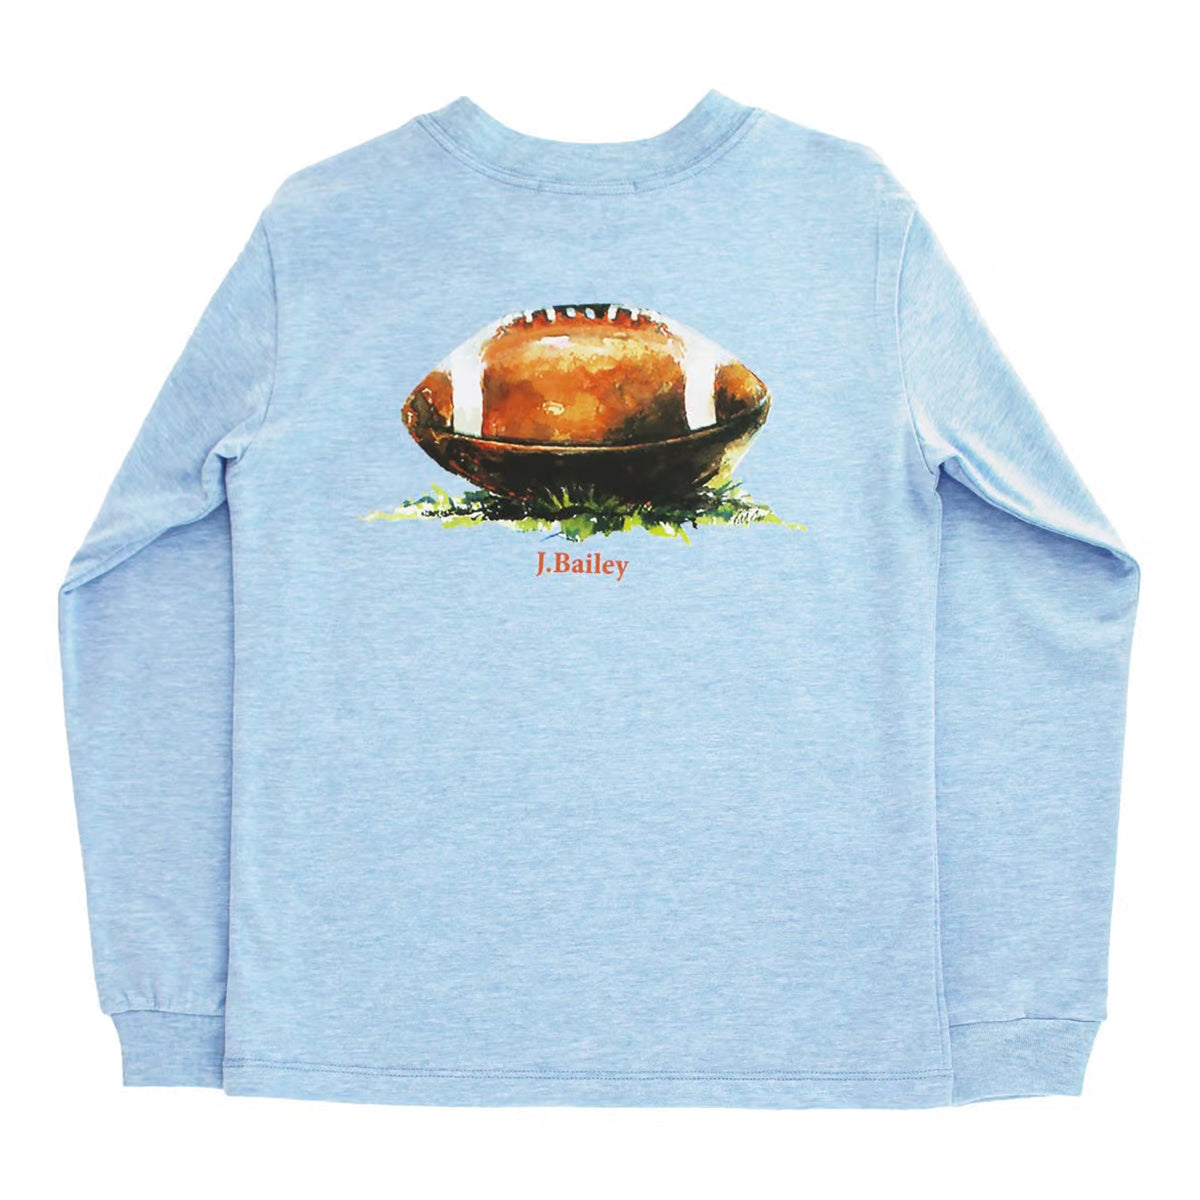 Toddler Boy's Football on Heathered Blue Logo T-Shirt by J. Bailey